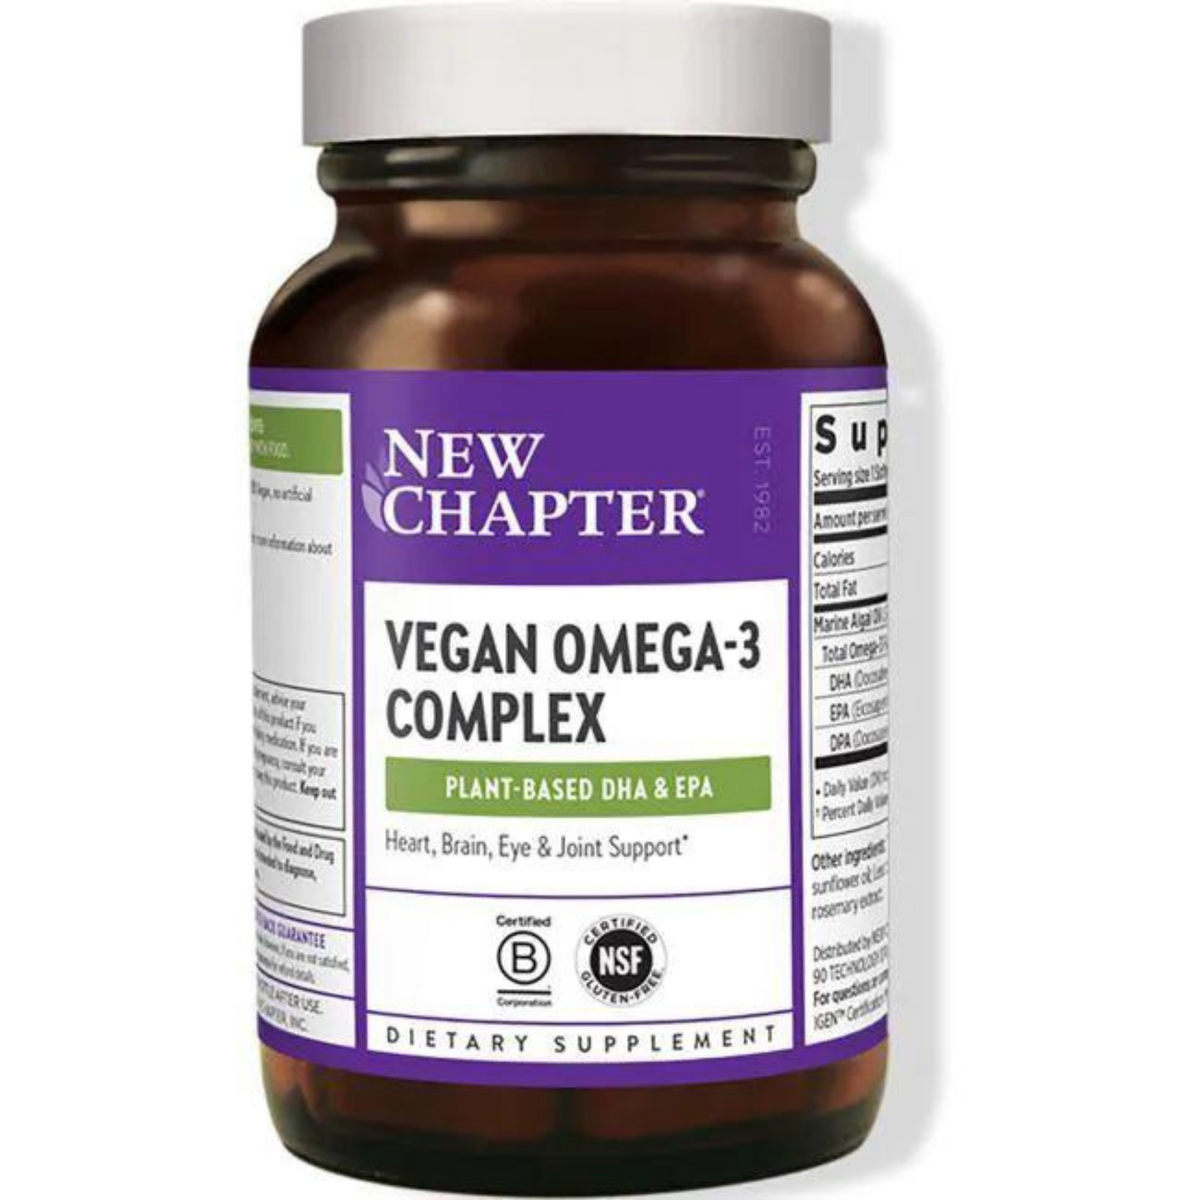 Primary Image of Vegan Omega-3 Complex Softgels (30 count)